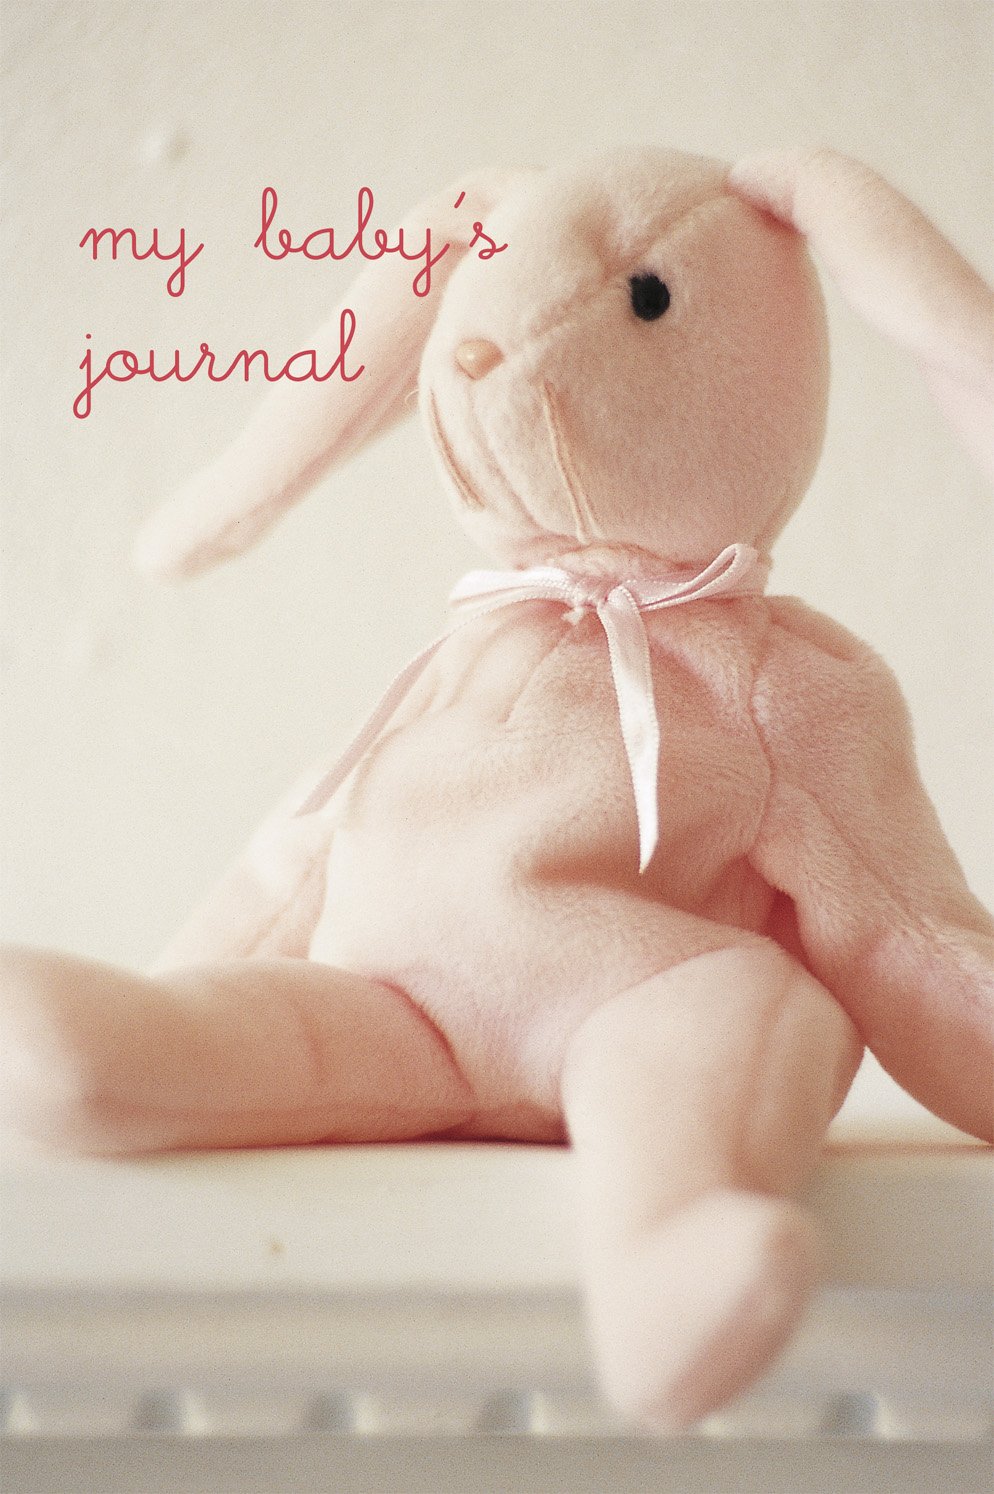 My Baby's Journal - Ryland and Peters & Small